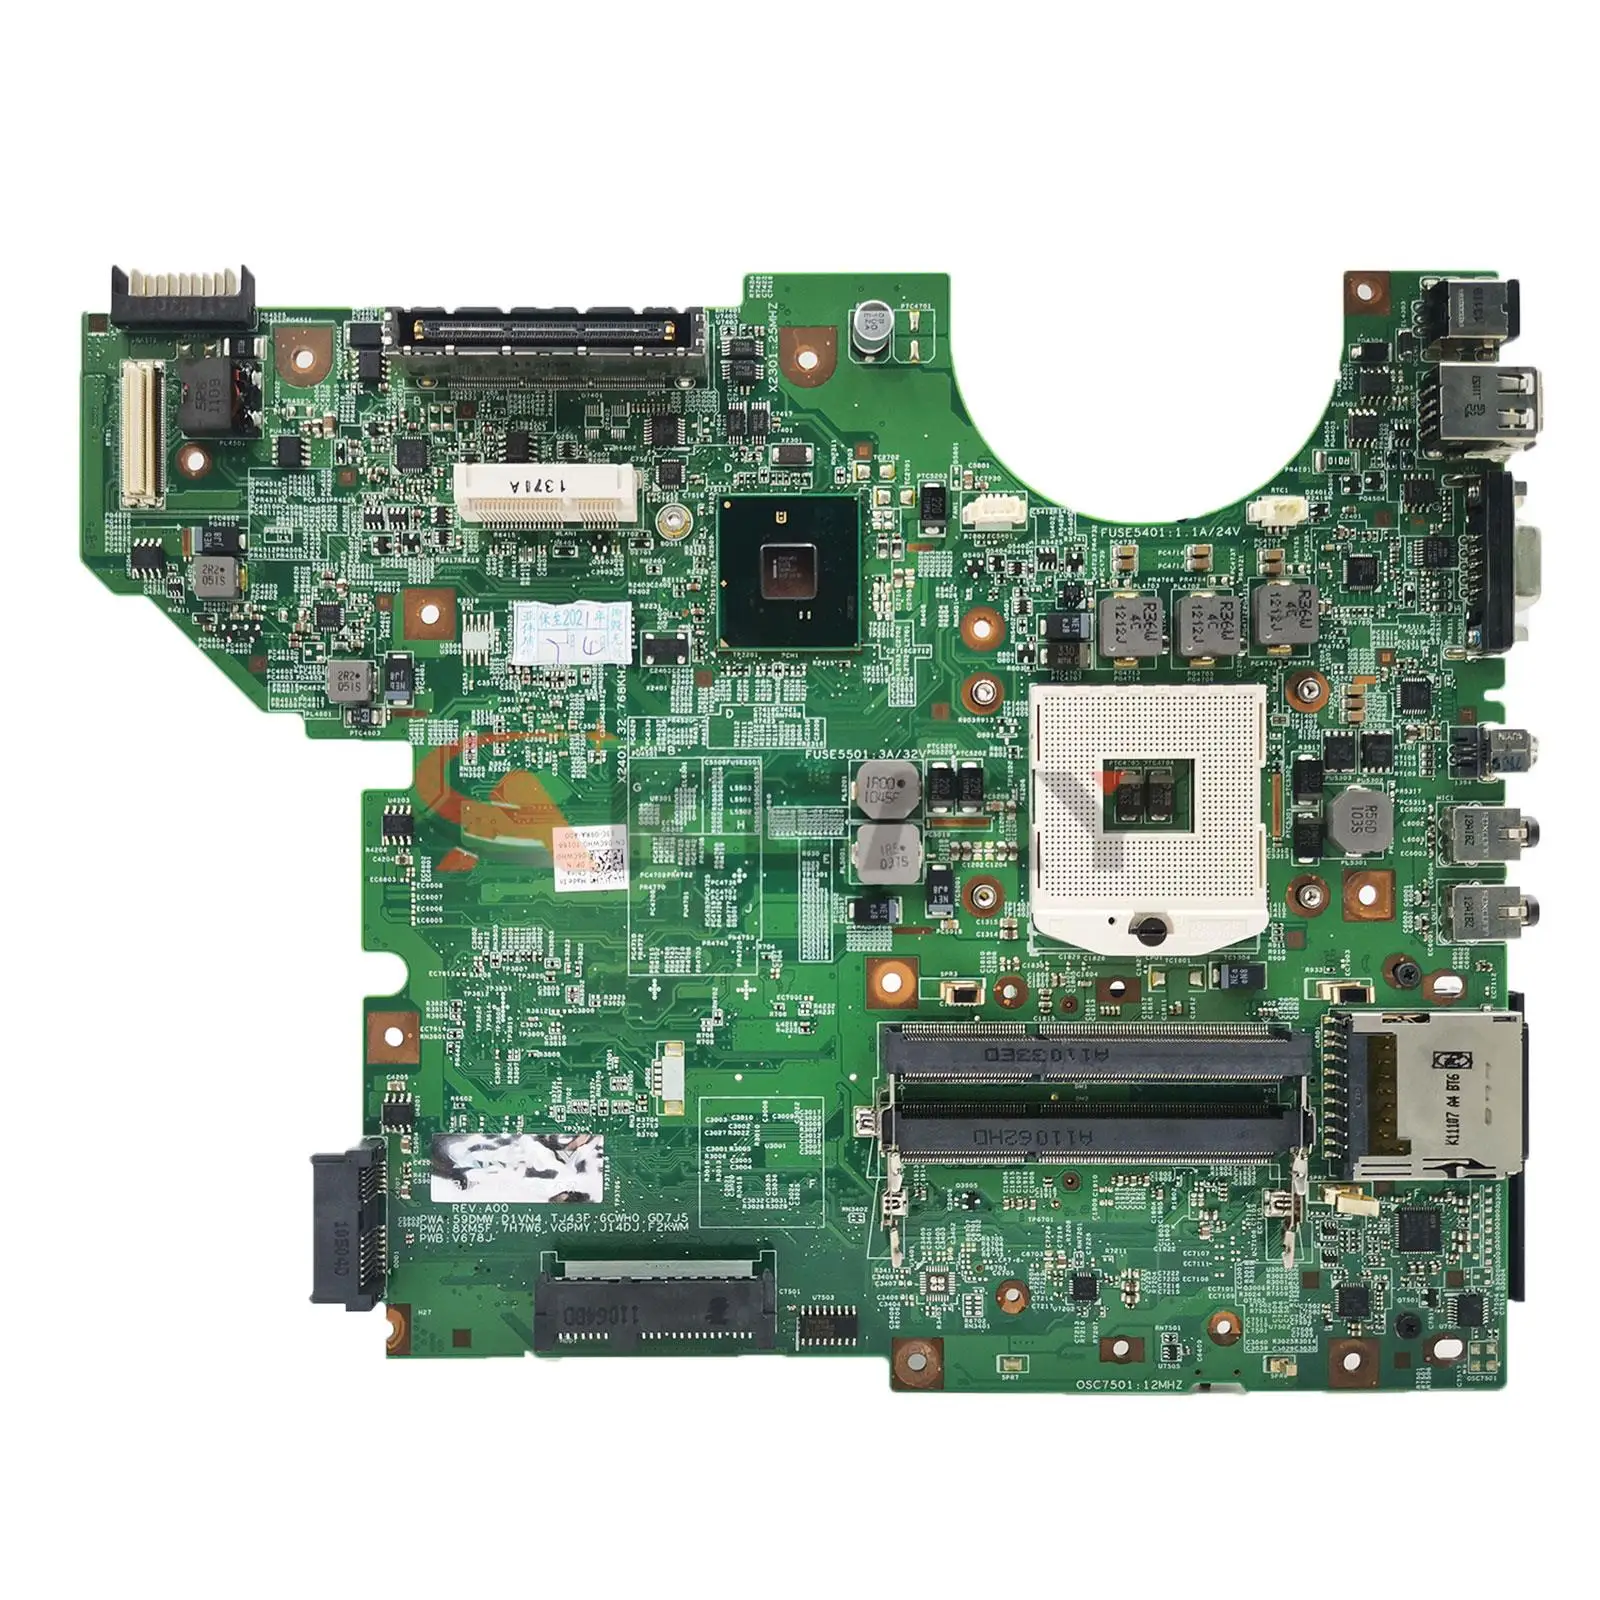 

Laptop motherboard For DELL Latitude E5410 09276-1 Mainboard CN-0D1VN4 0D1VN4 HM55 100% testing ok